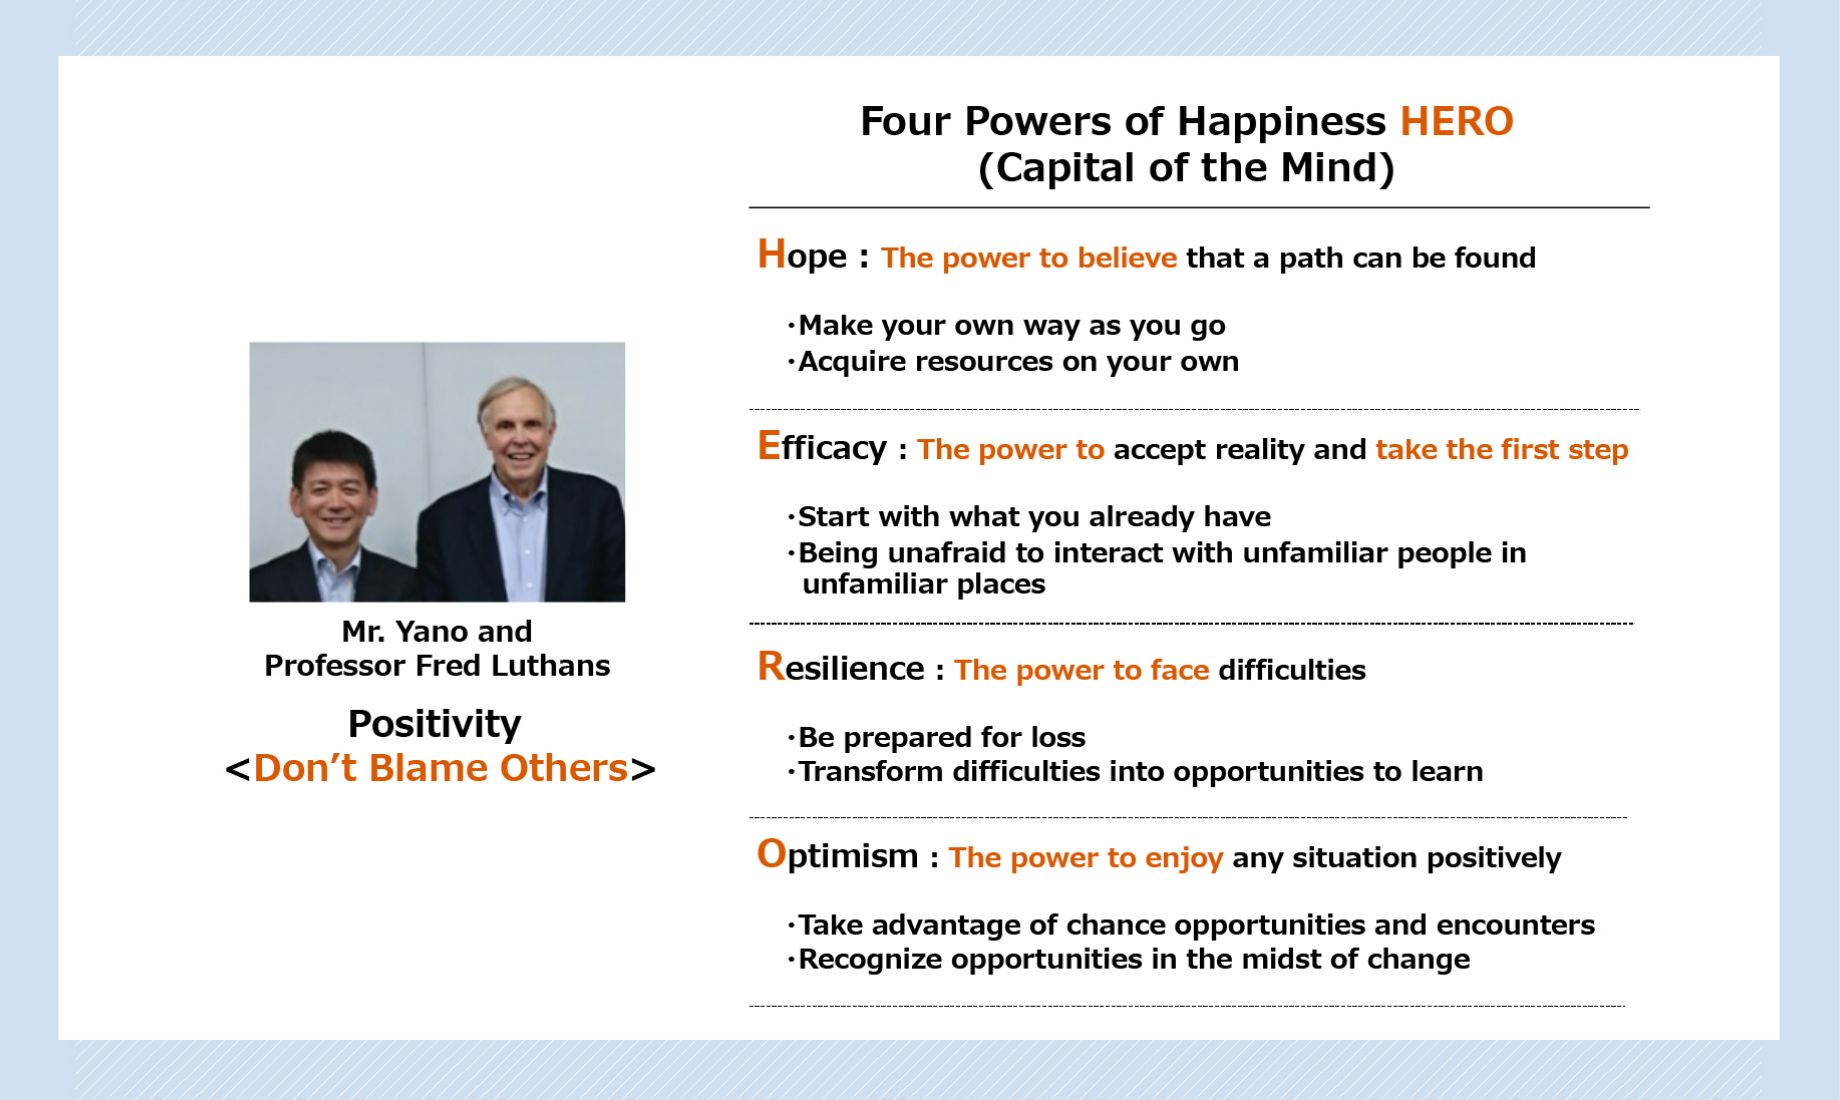 Four Powers of Happiness HERO (Capital of the Mind)